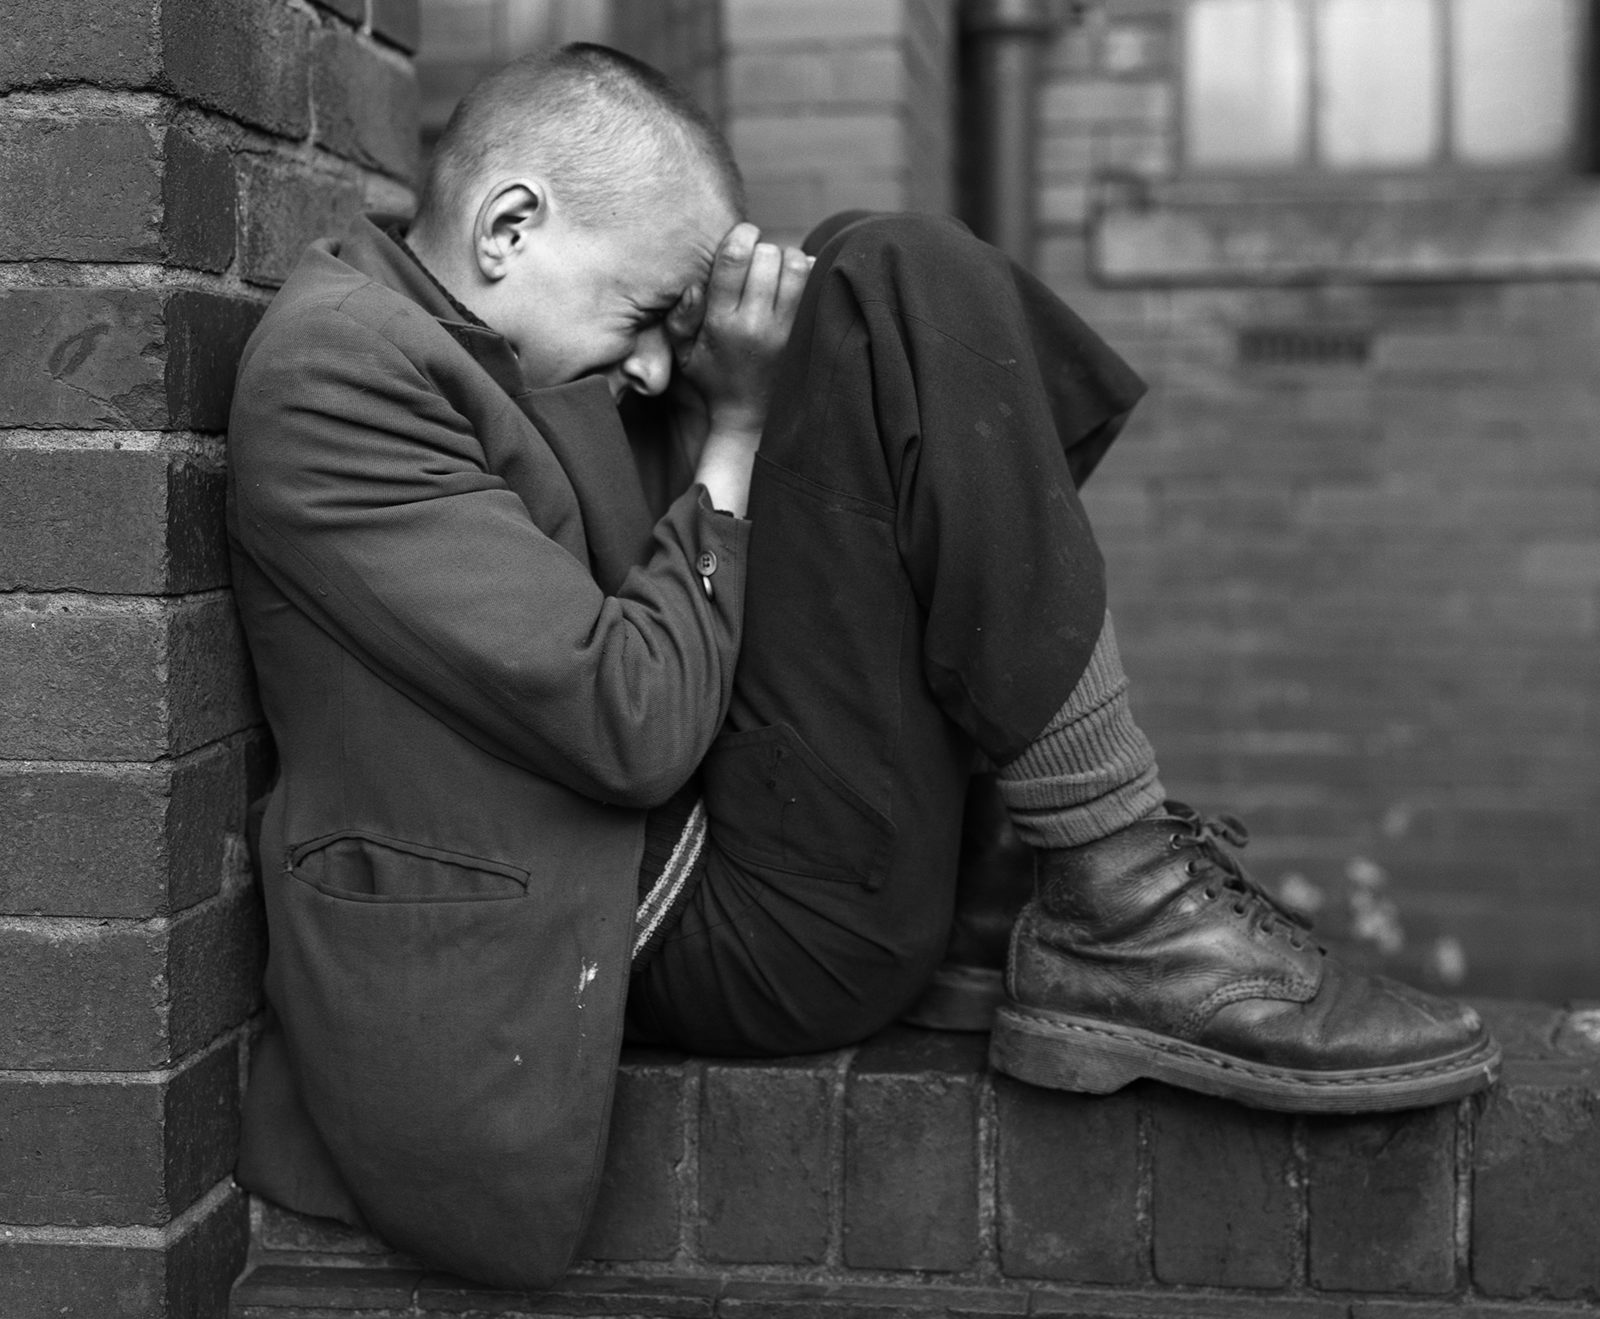 Black and white side-on photograph of a young person hunched up on a wall with a pained expression, which appears in the new Chris Killip exhibition